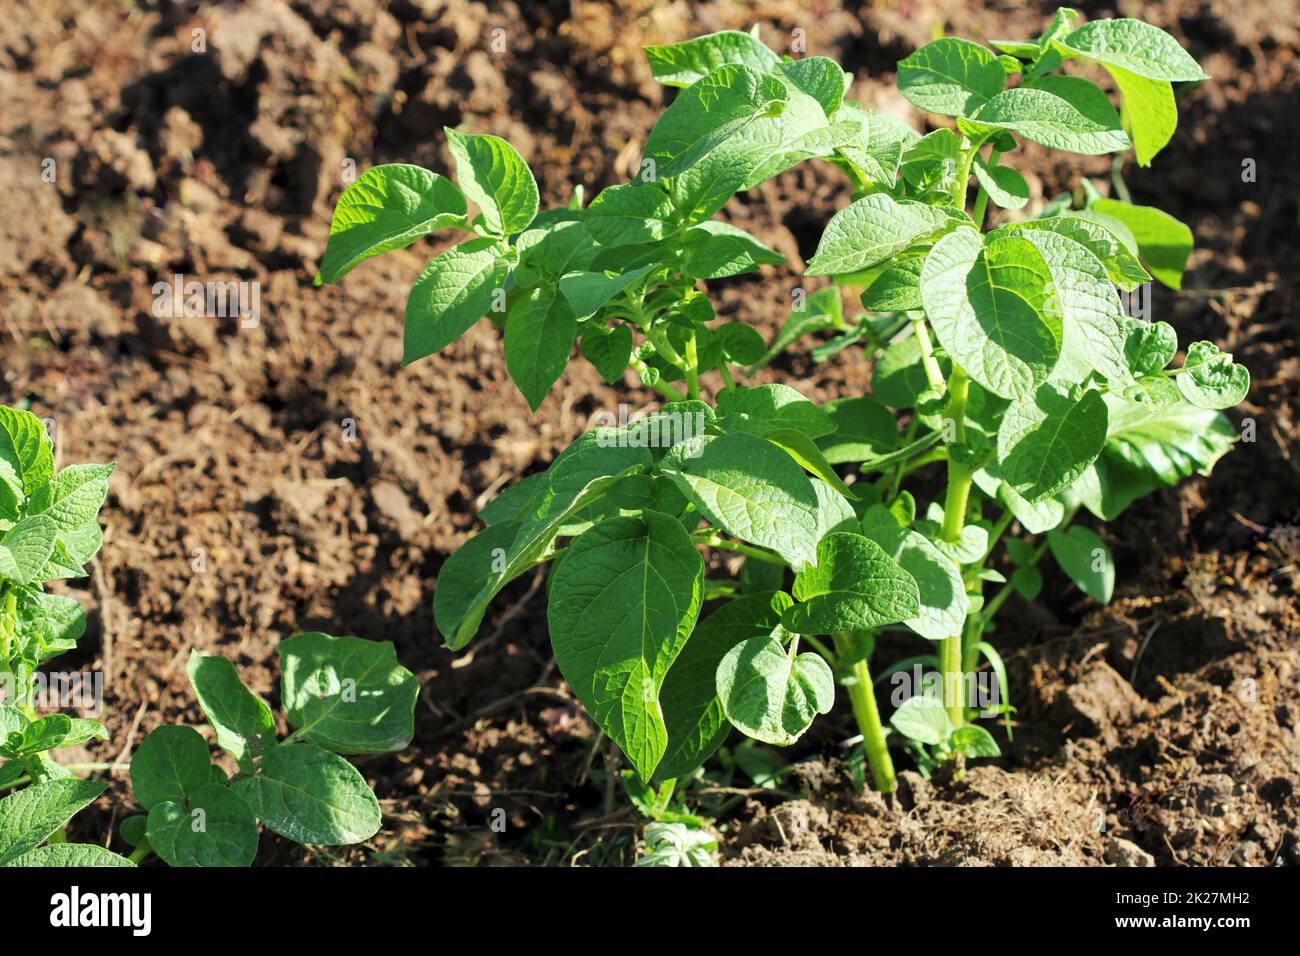 Green potato plant. Leaf of vegetable. Organic food agriculture in garden, field or farm Stock Photo